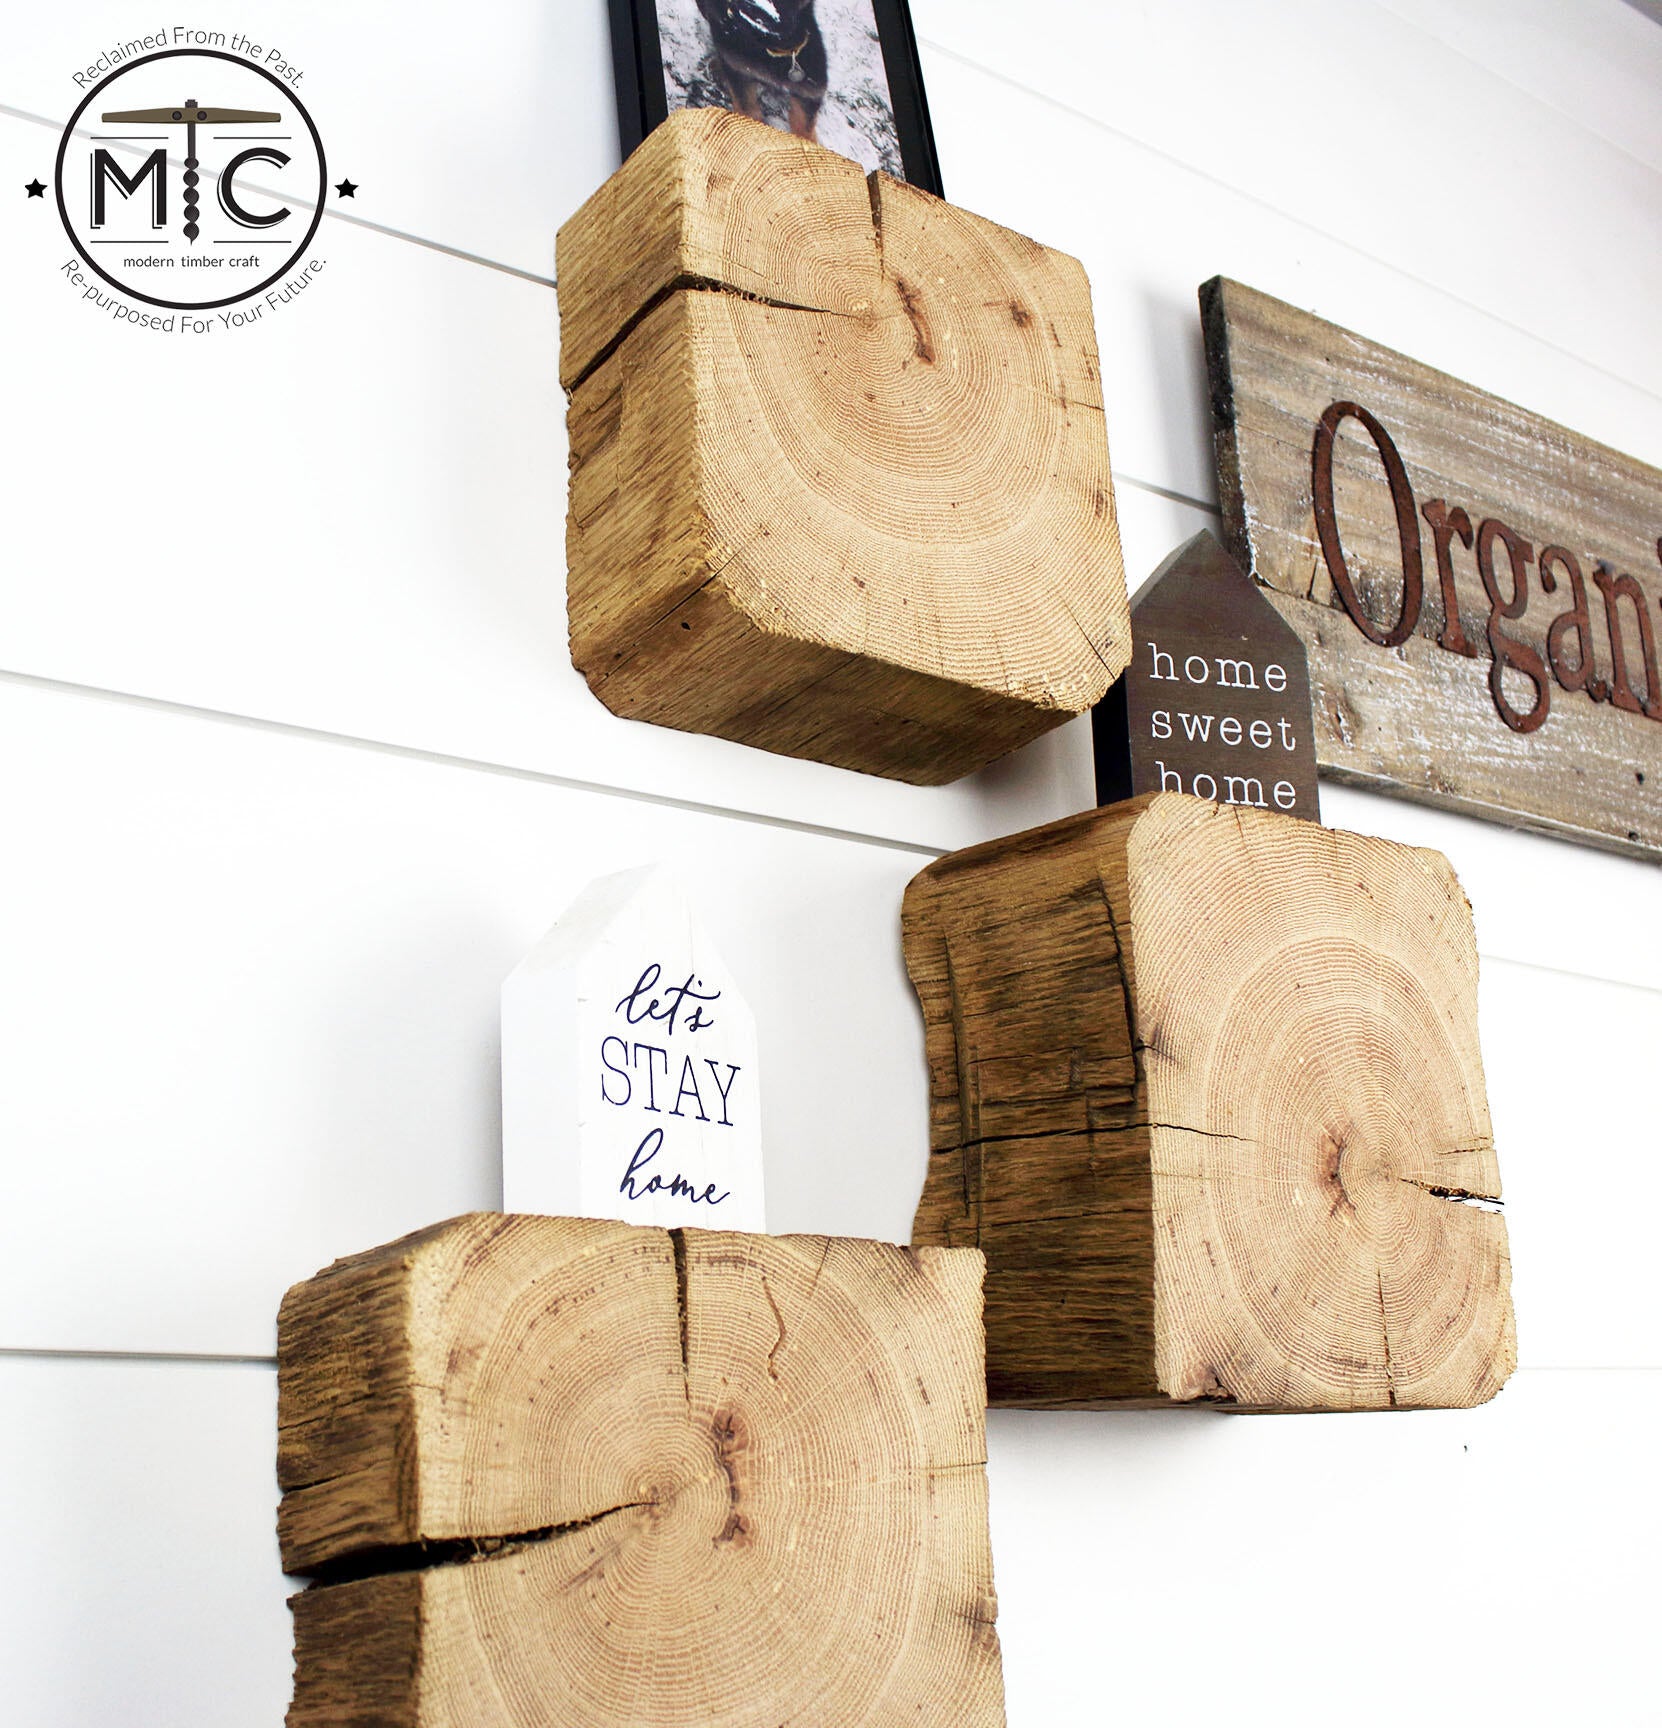 a set of three reclaimed wood wall blocks. The front facing sides are a fresh cut end displaying the growth rings and checking in the wood. The three blocks are staggered on the wall with minimal decor. This angle shows the aged layer of material and characteristics in the blocks.